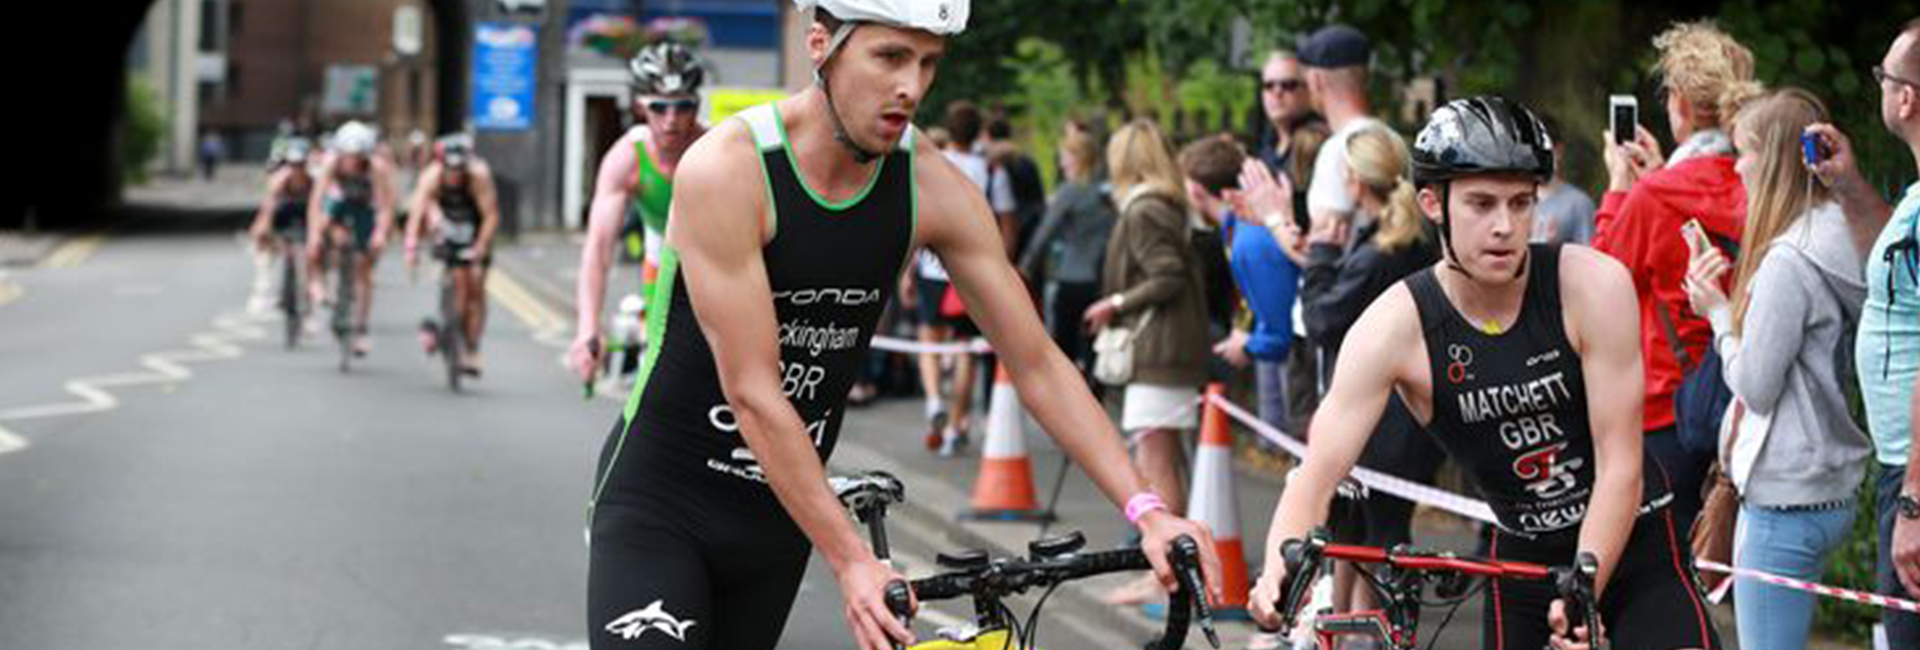 Two Cyclists taking part in a triathlon race